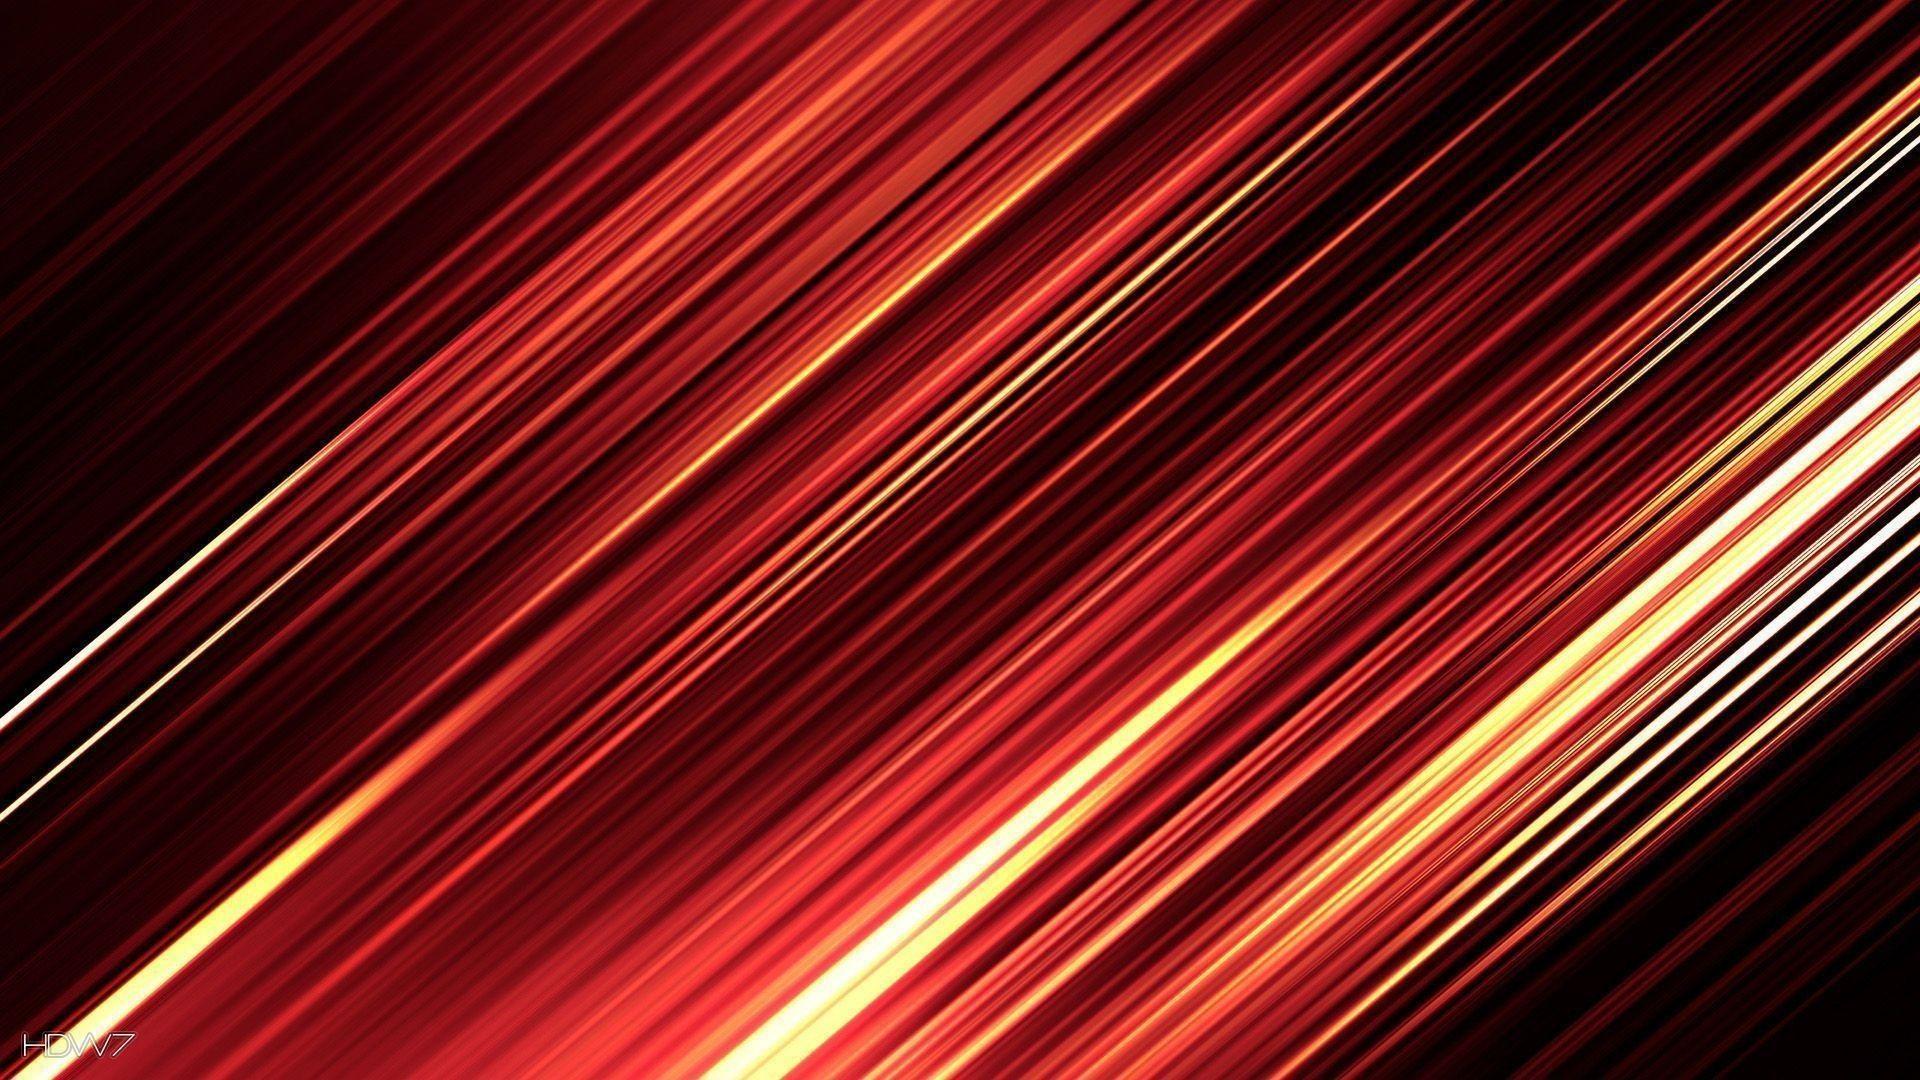 Red and Gold Abstract Wallpapers - Top Free Red and Gold Abstract ...